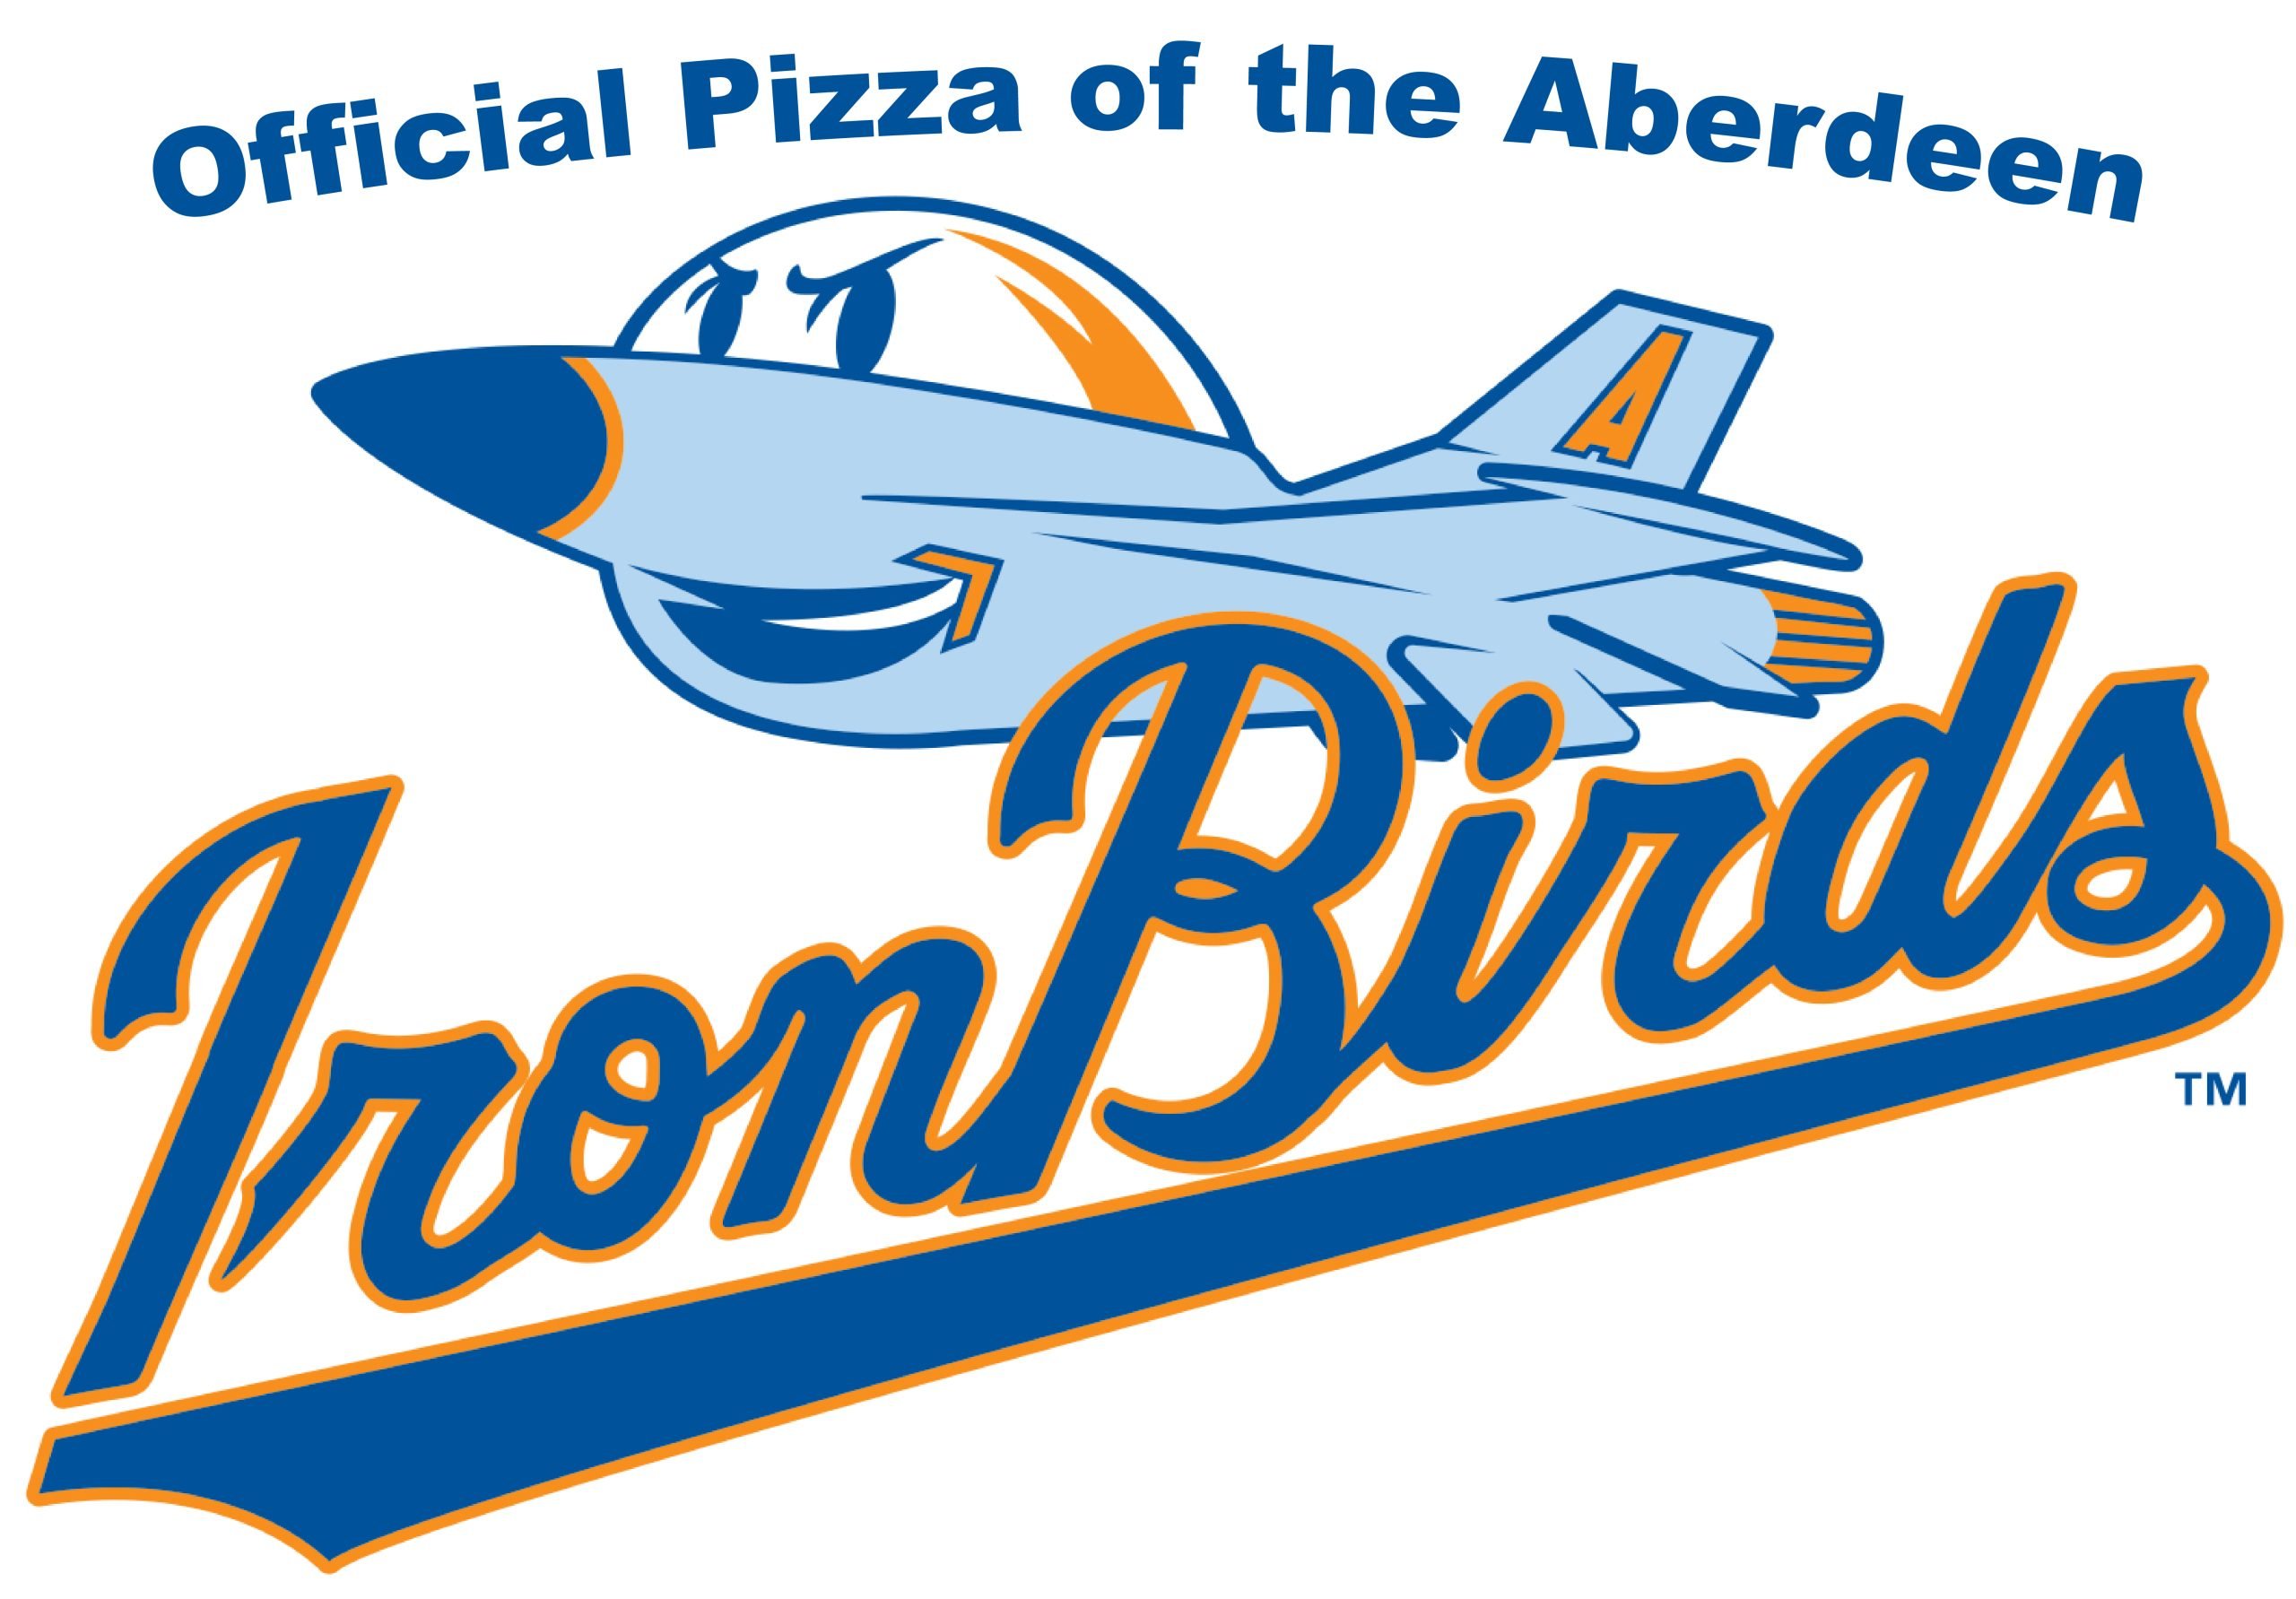 Ledo Pizza is the Official Pizza of the Aberdeen Ironbirds